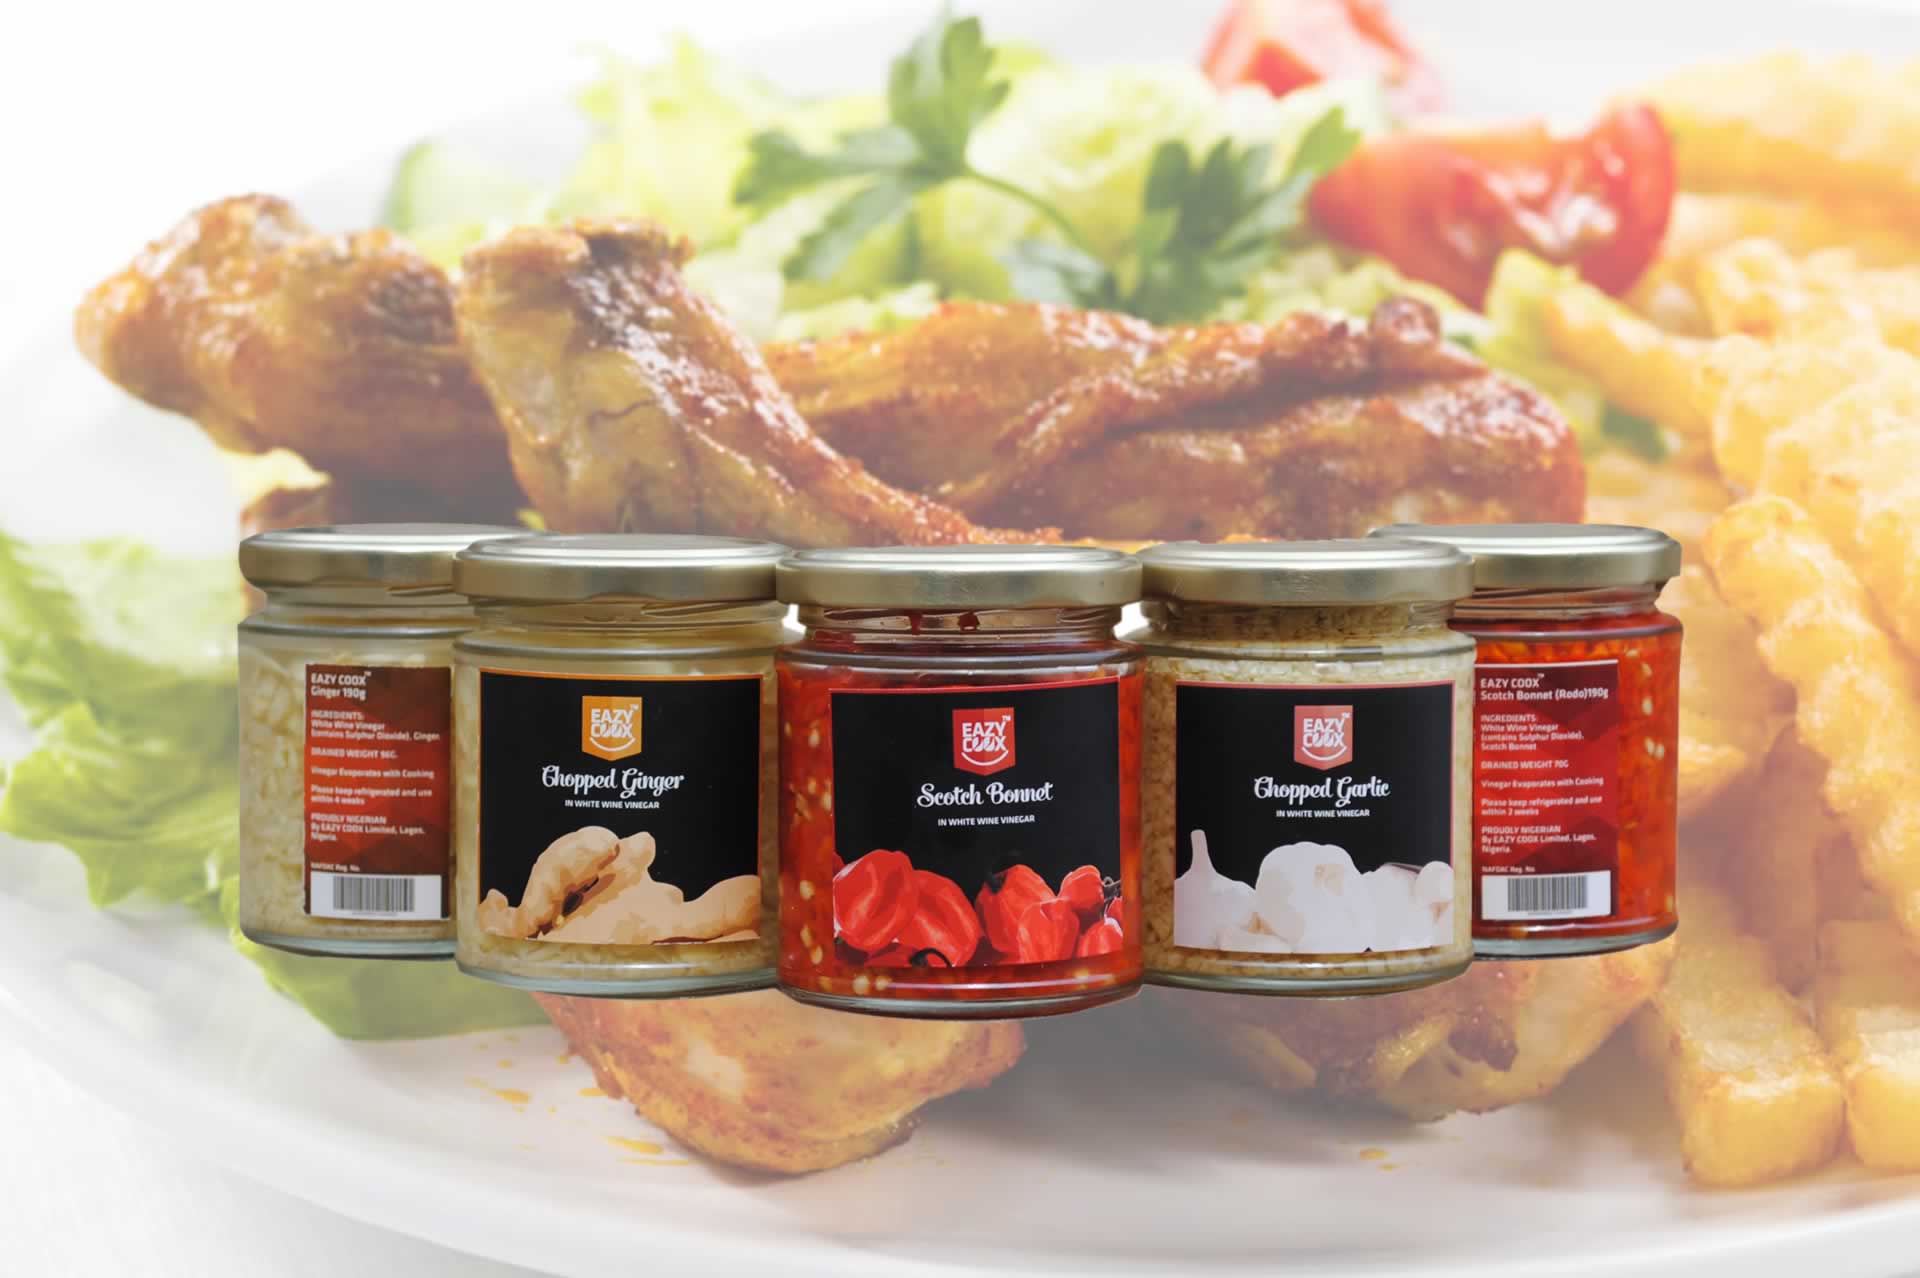 Eazy Coox Takes Cooking to Next Level with New Food Condiments